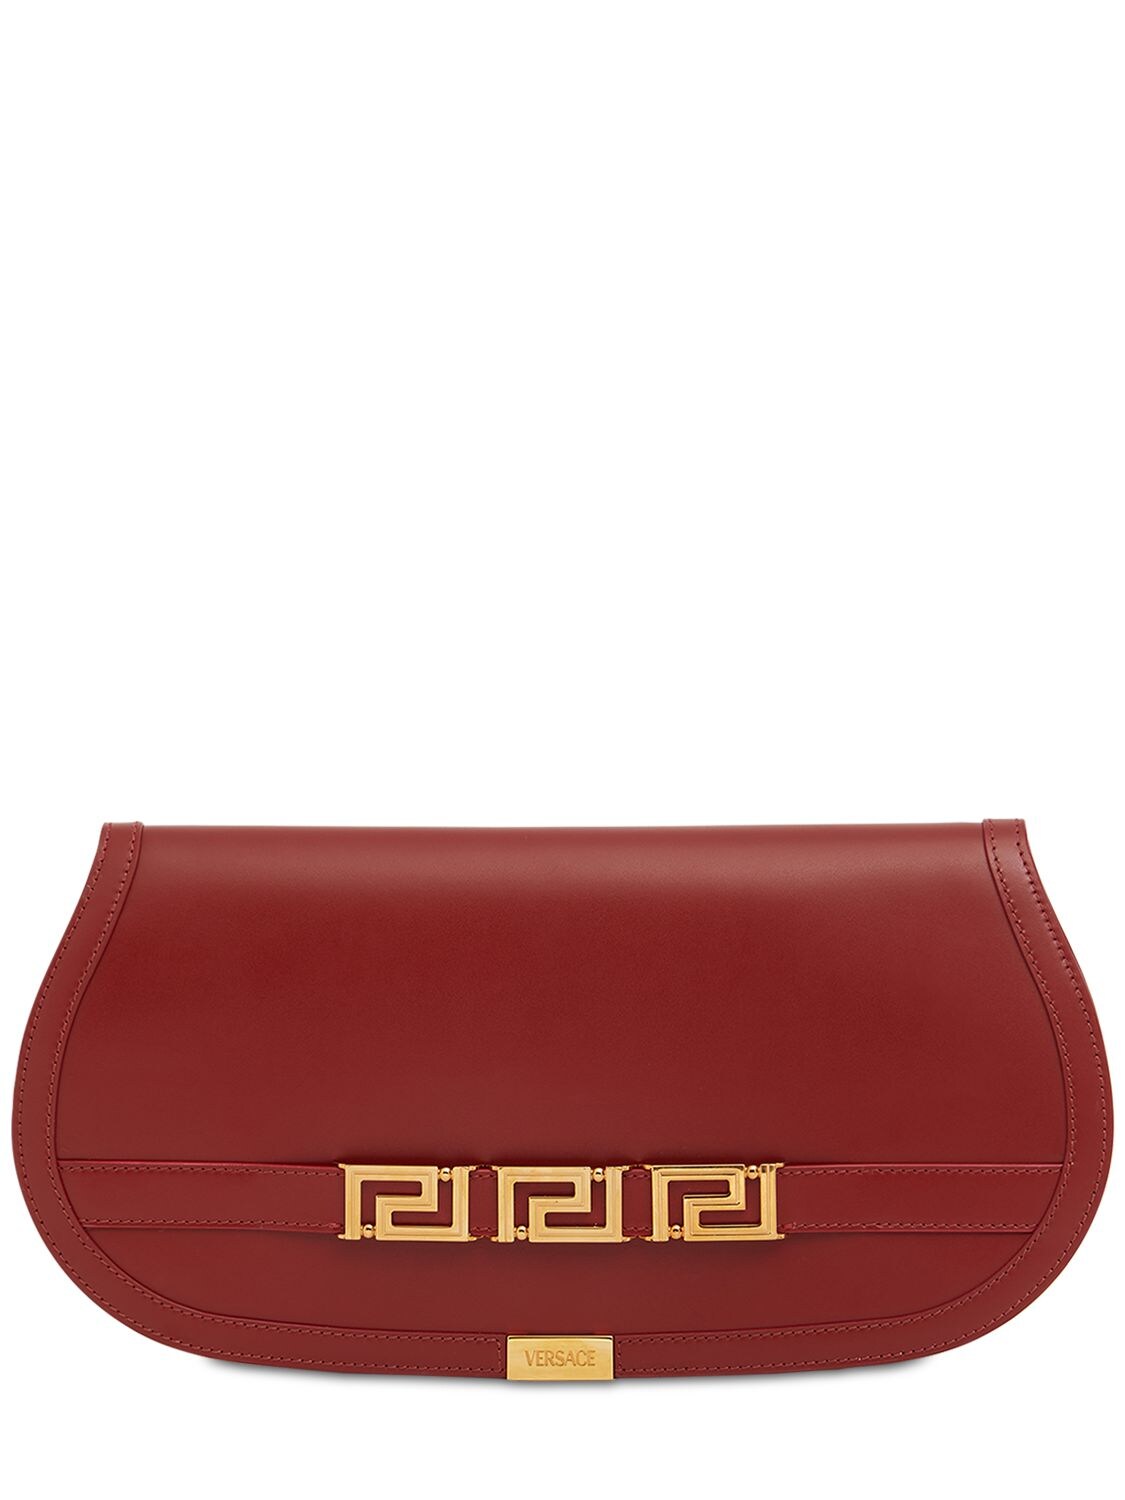 Greca Goddess Rounded Leather Clutch